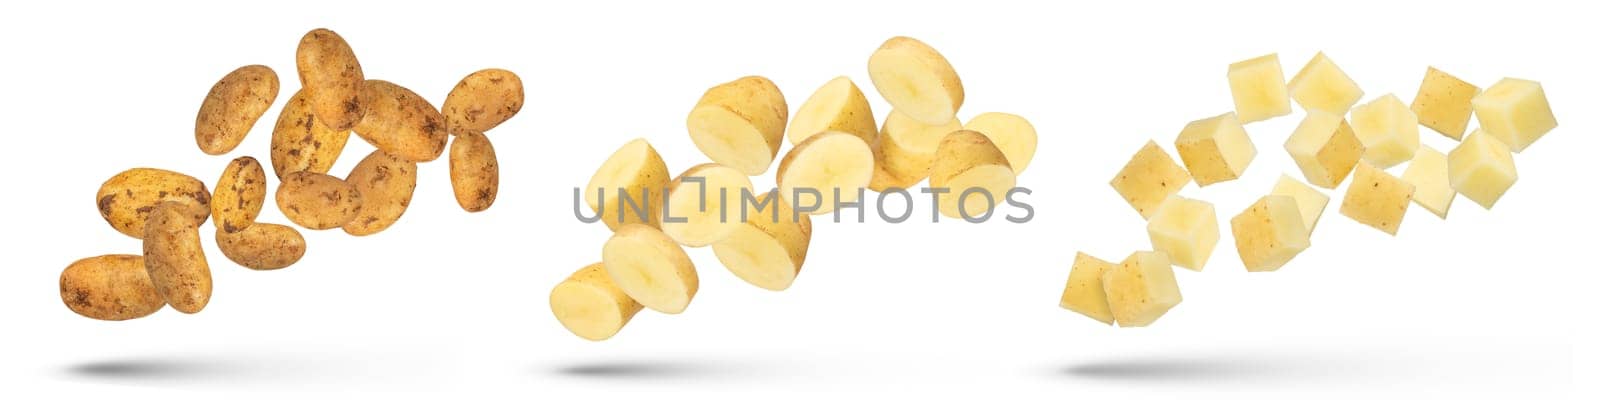 Flying vegetables set. Flying potatoes isolated on white background. Isolate of fresh falling potatoes of different sizes and cut shapes. Potato season. High quality photo